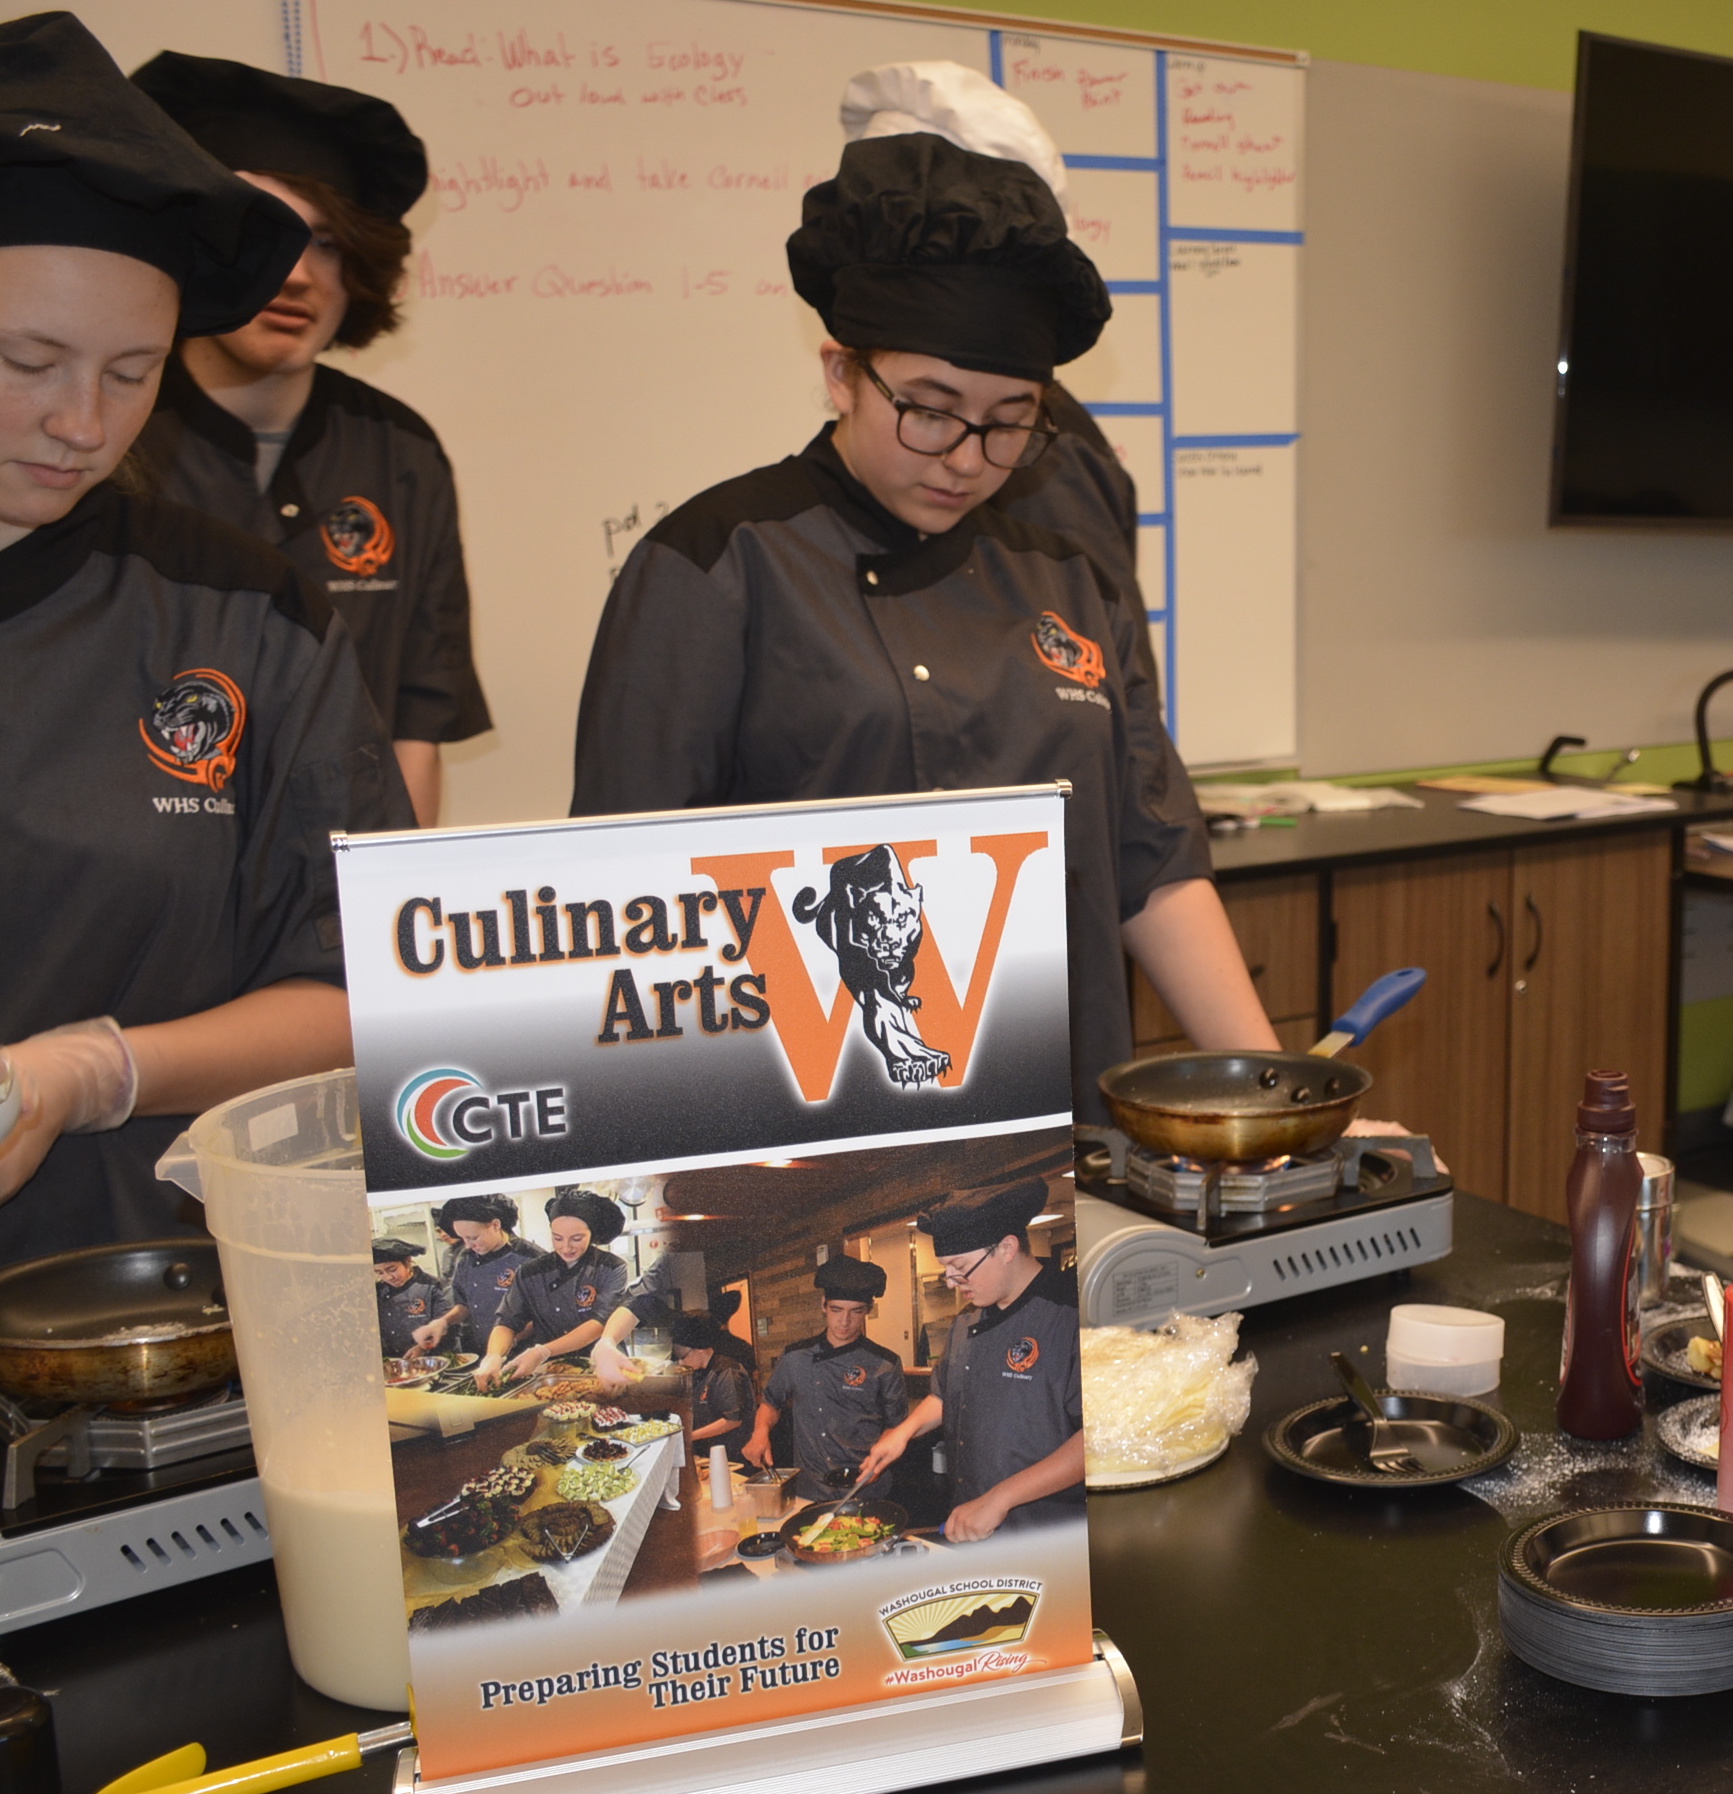 Students from Washougal High talk about the WHS Culinary program, wearing chef hats